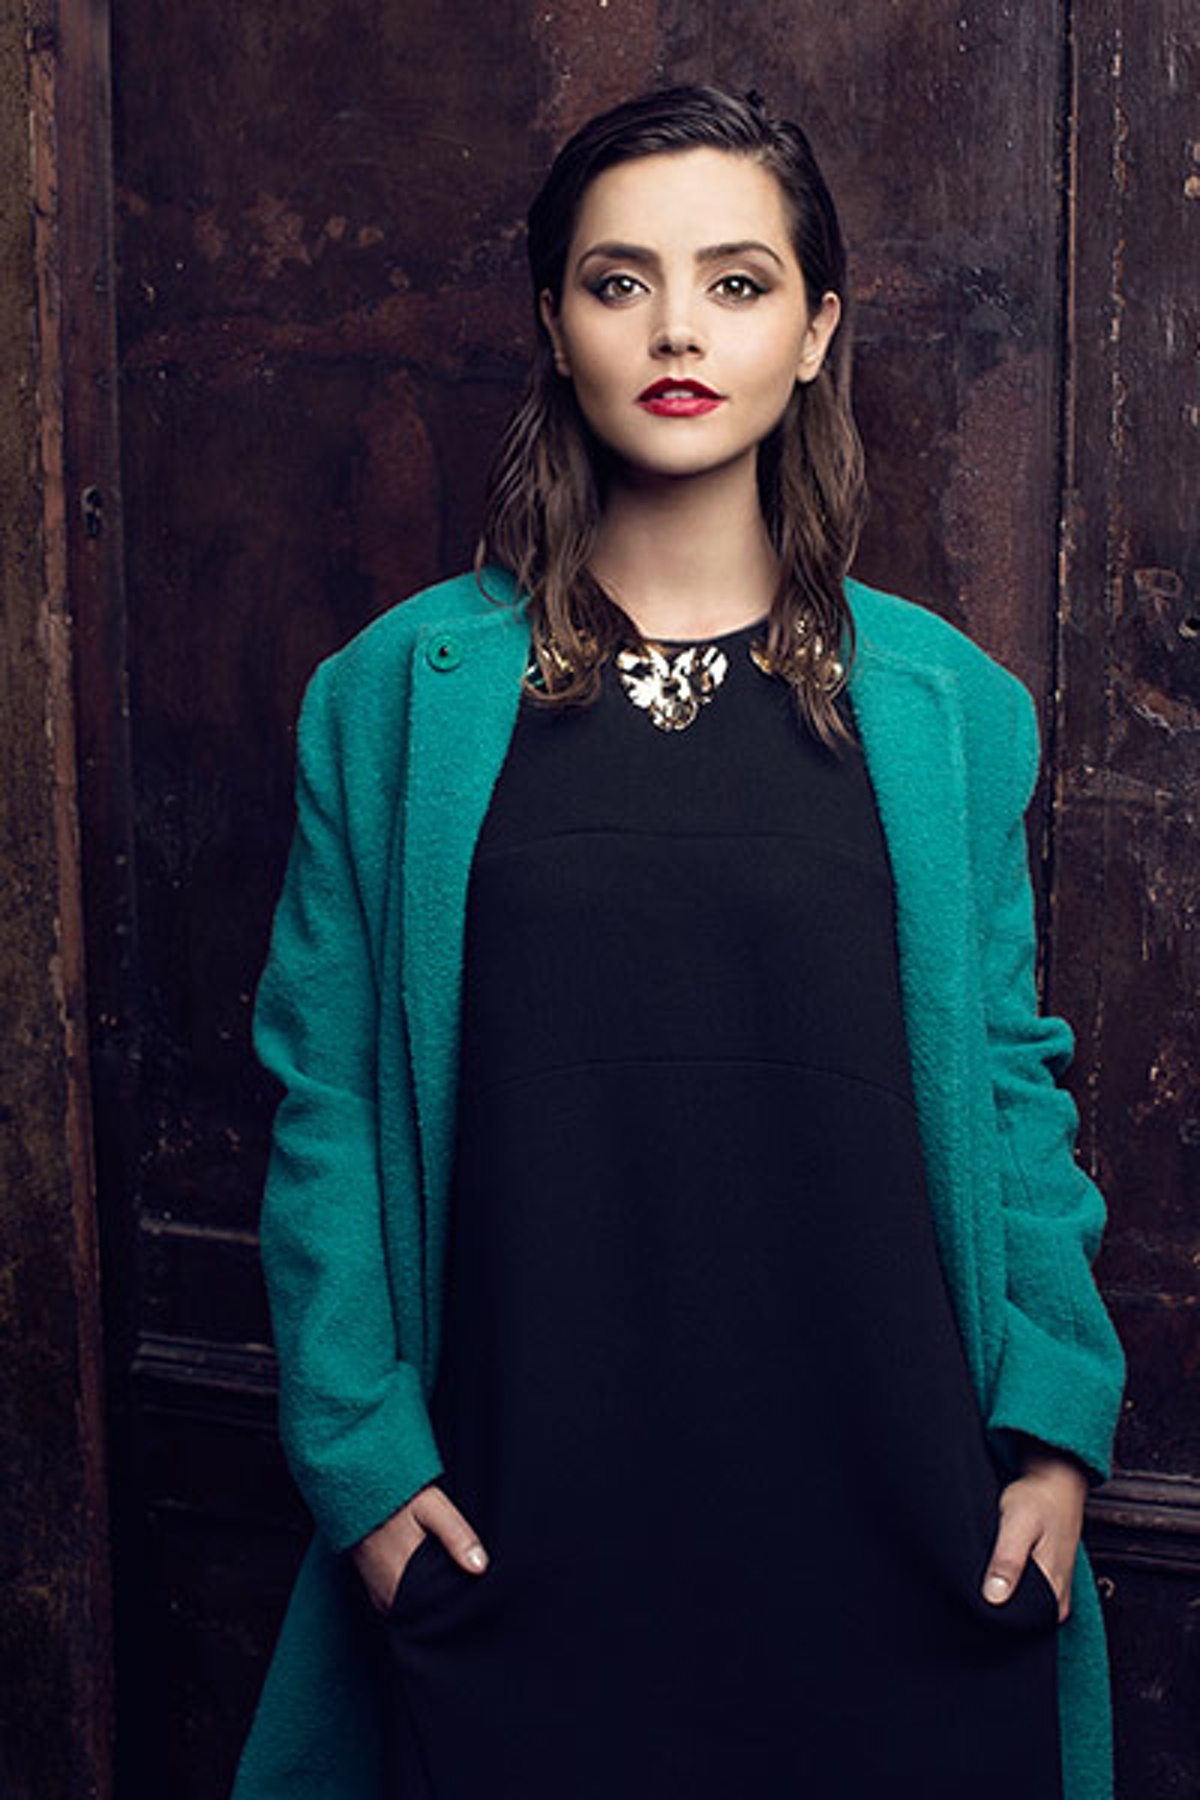 Jenna Coleman Wallpapers Images Photos Pictures Backgrounds